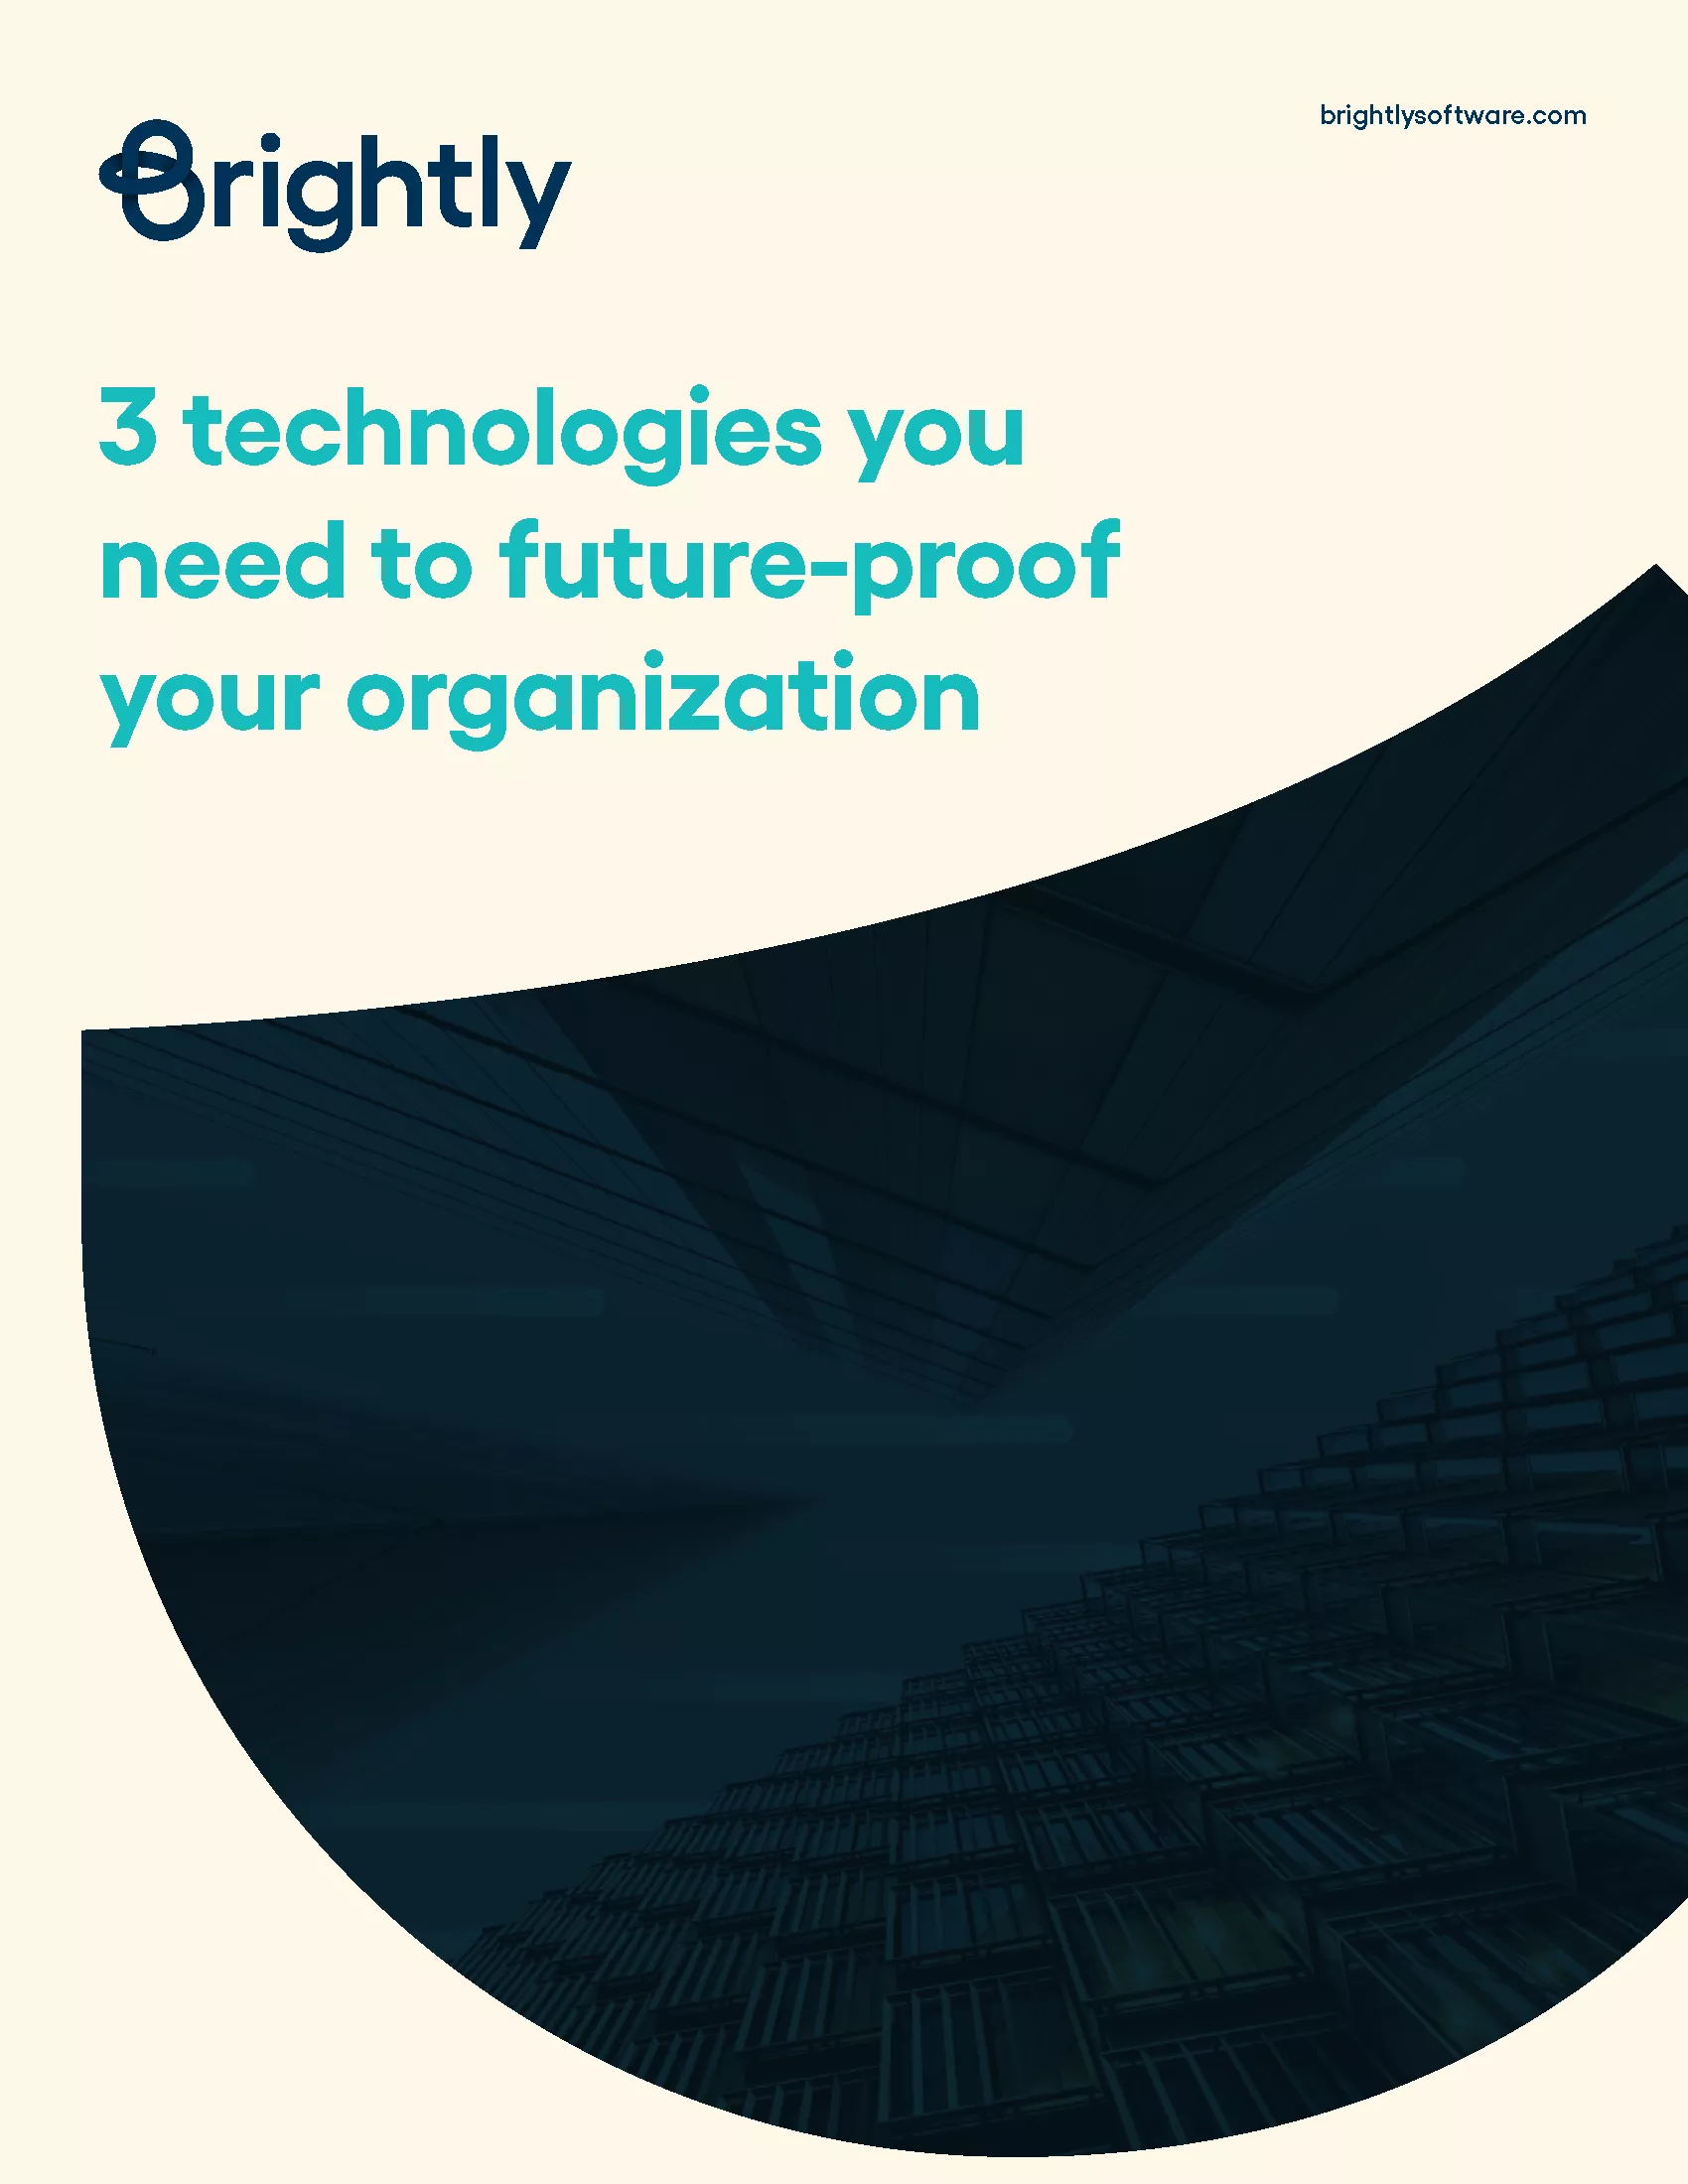 3 technologies you need to future-proof your organization